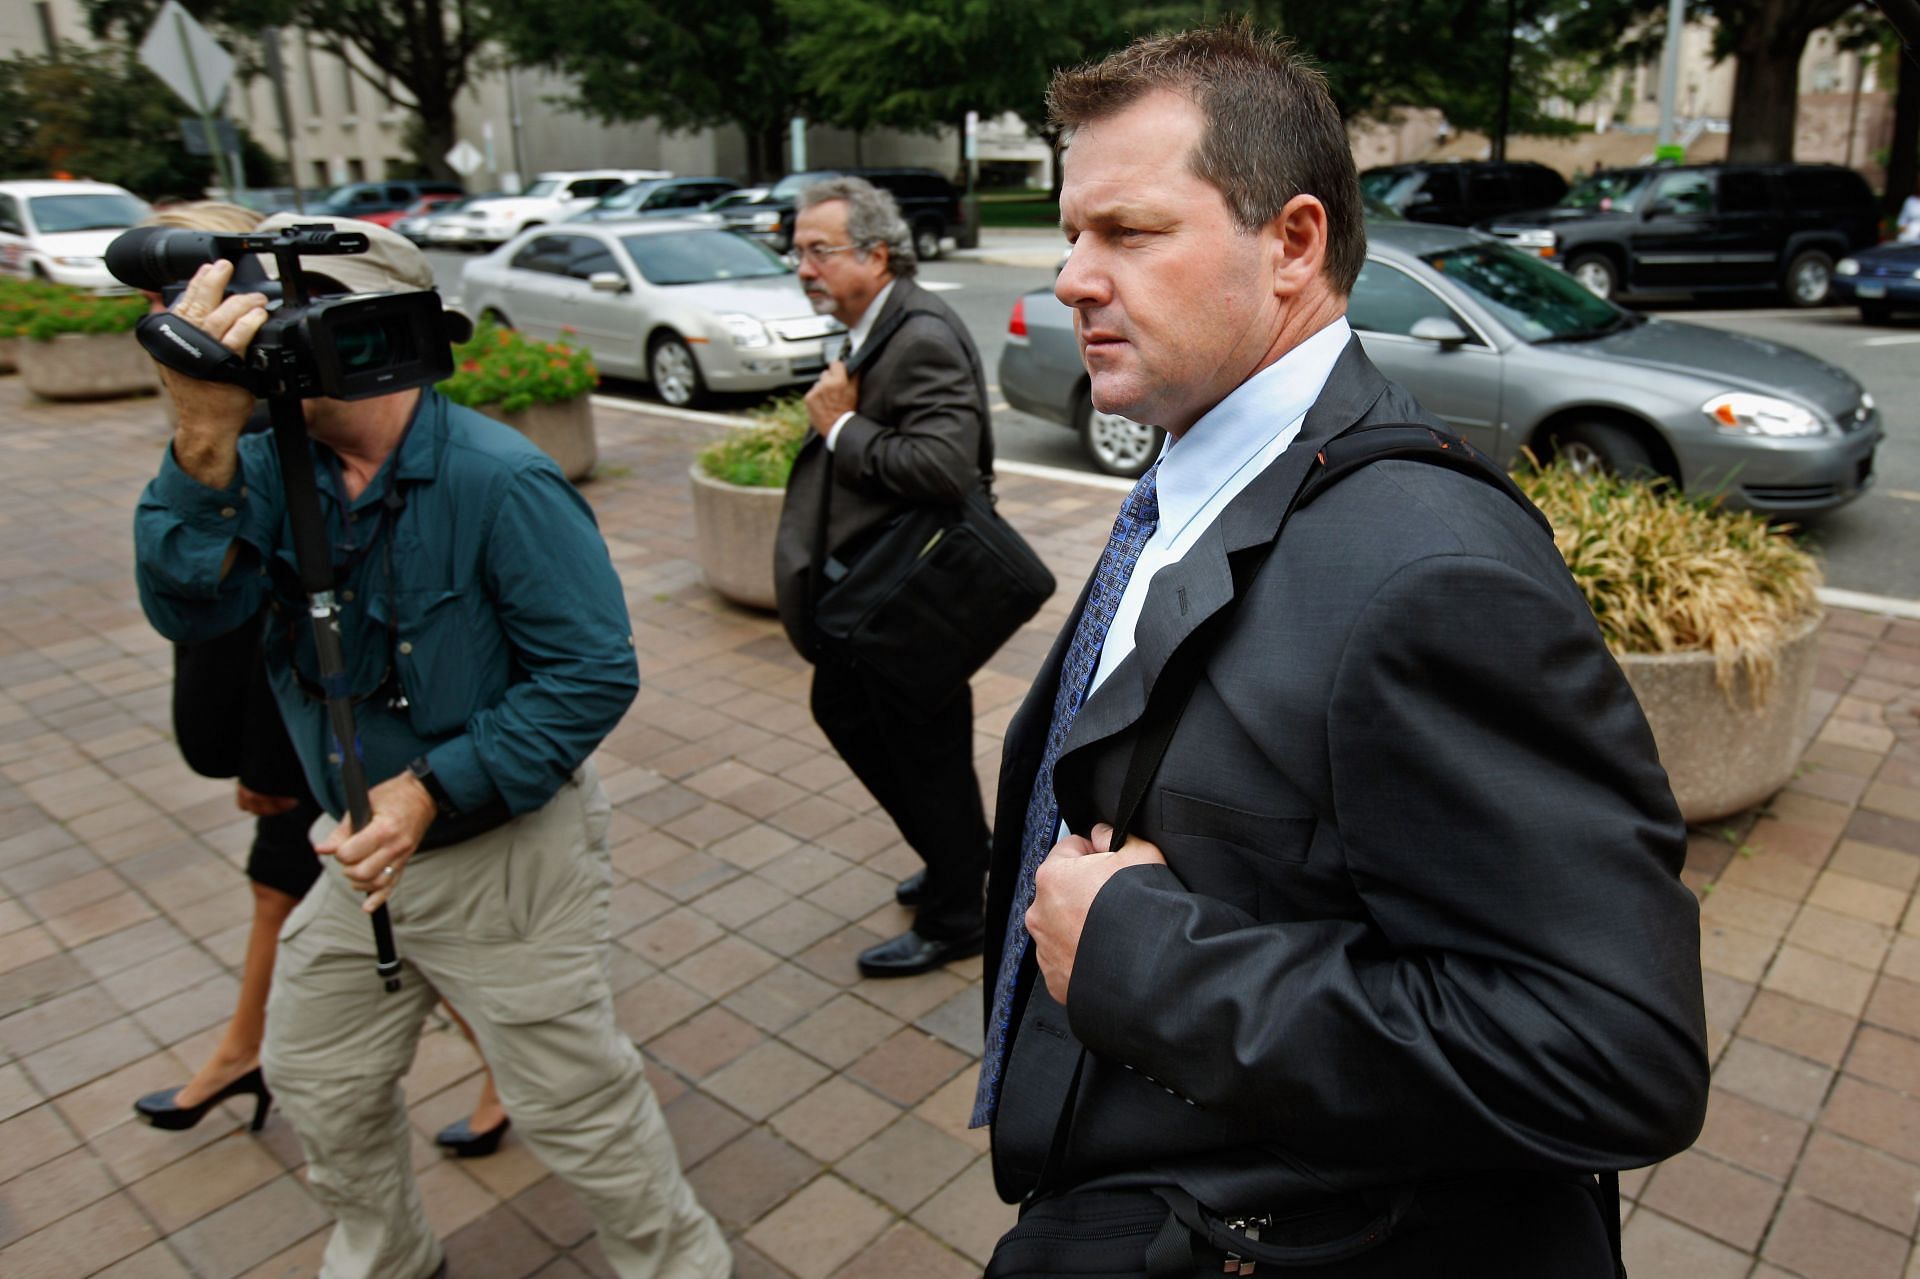 Roger Clemens attends hearing on possible perjury re-trial